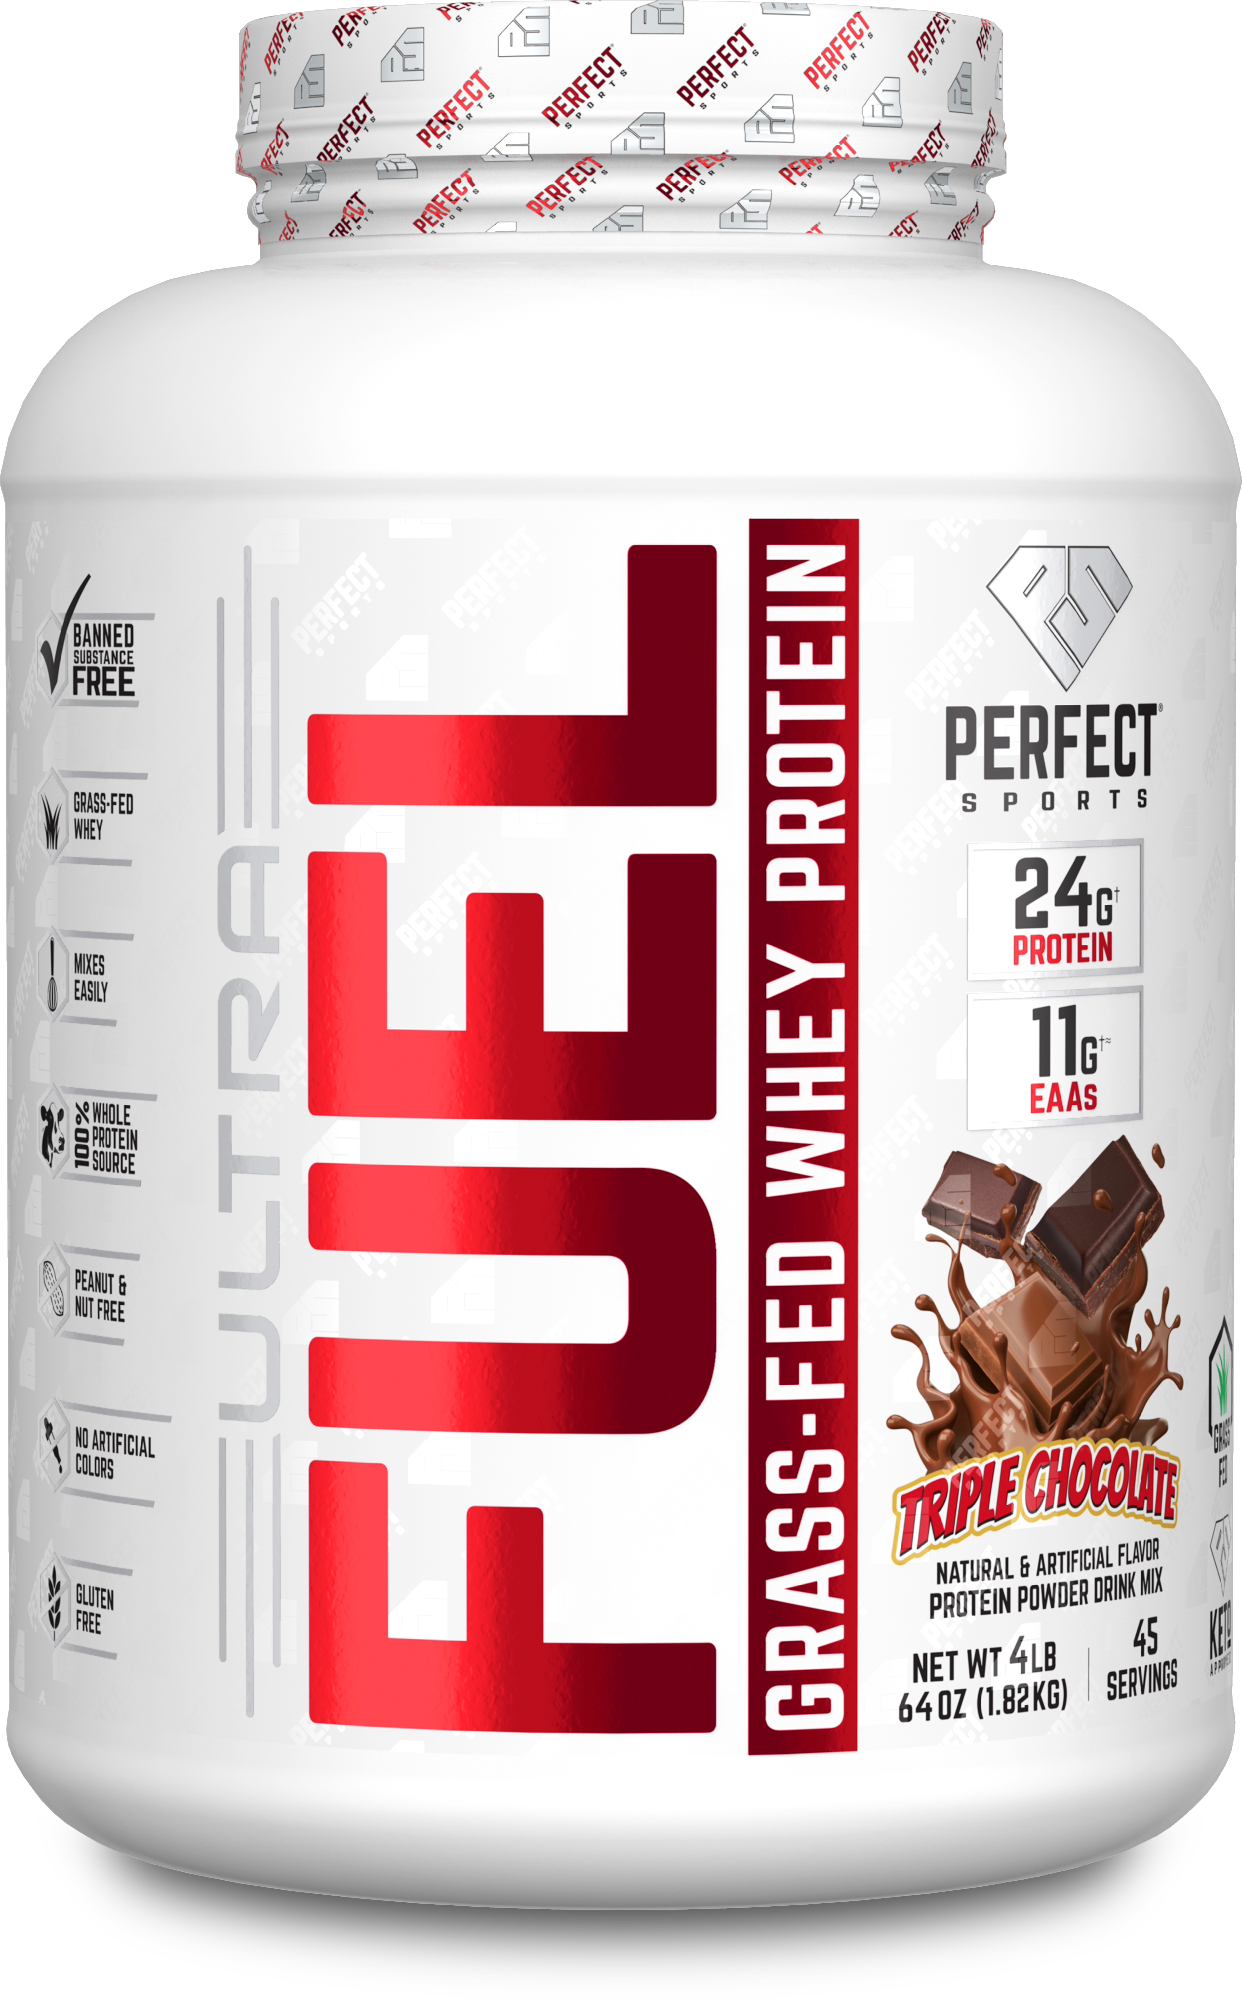 Perfect Sports Ultra Fuel Grass Fed Whey Protein 4lbs